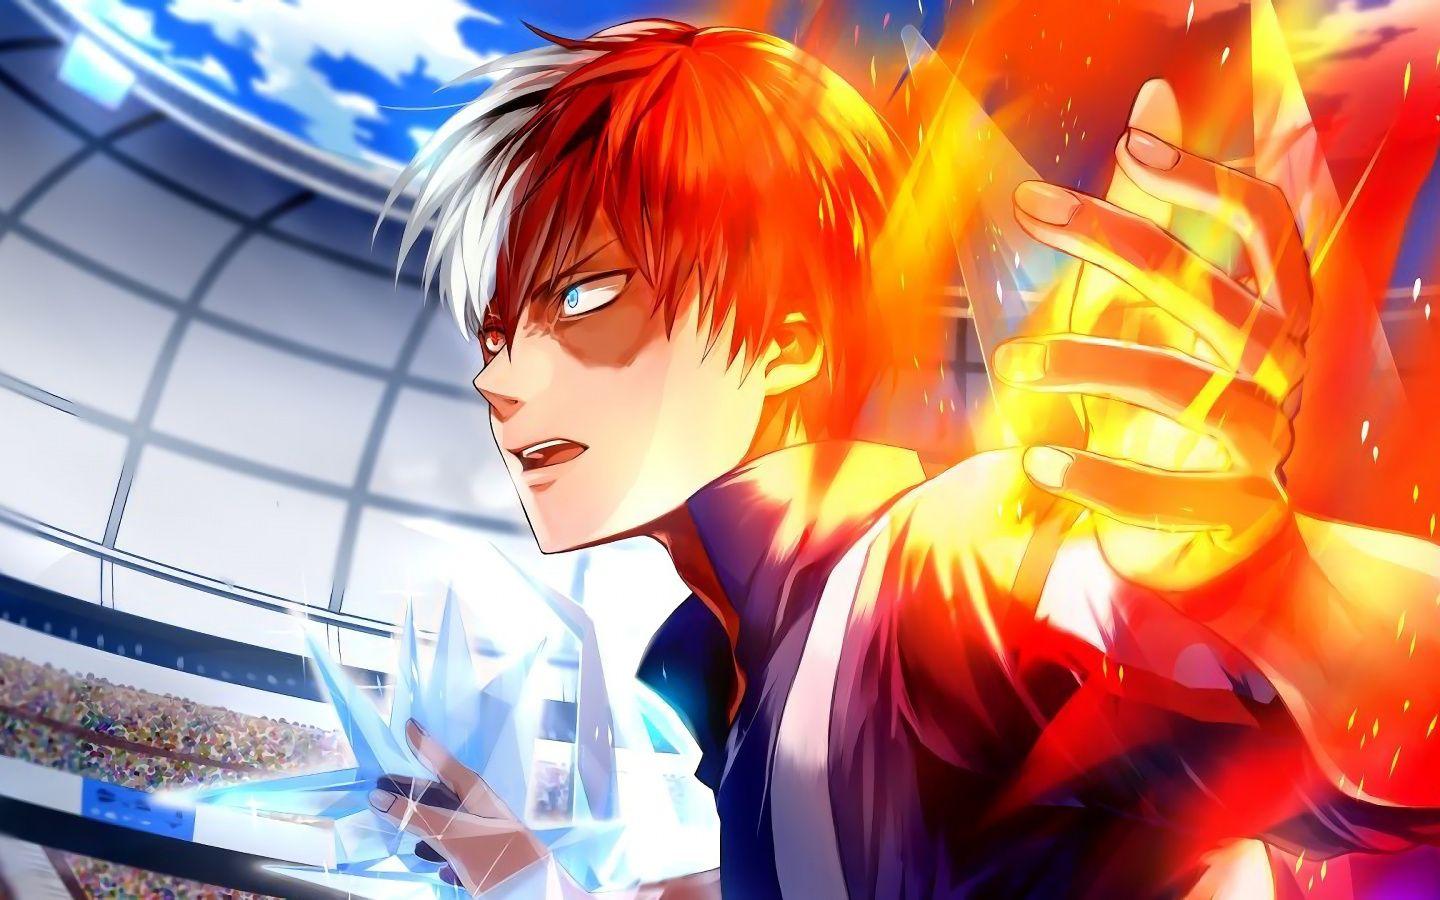 Download 1440x900 Wallpaper Fire And Ice, Anime Boy, Artwork, Shouto